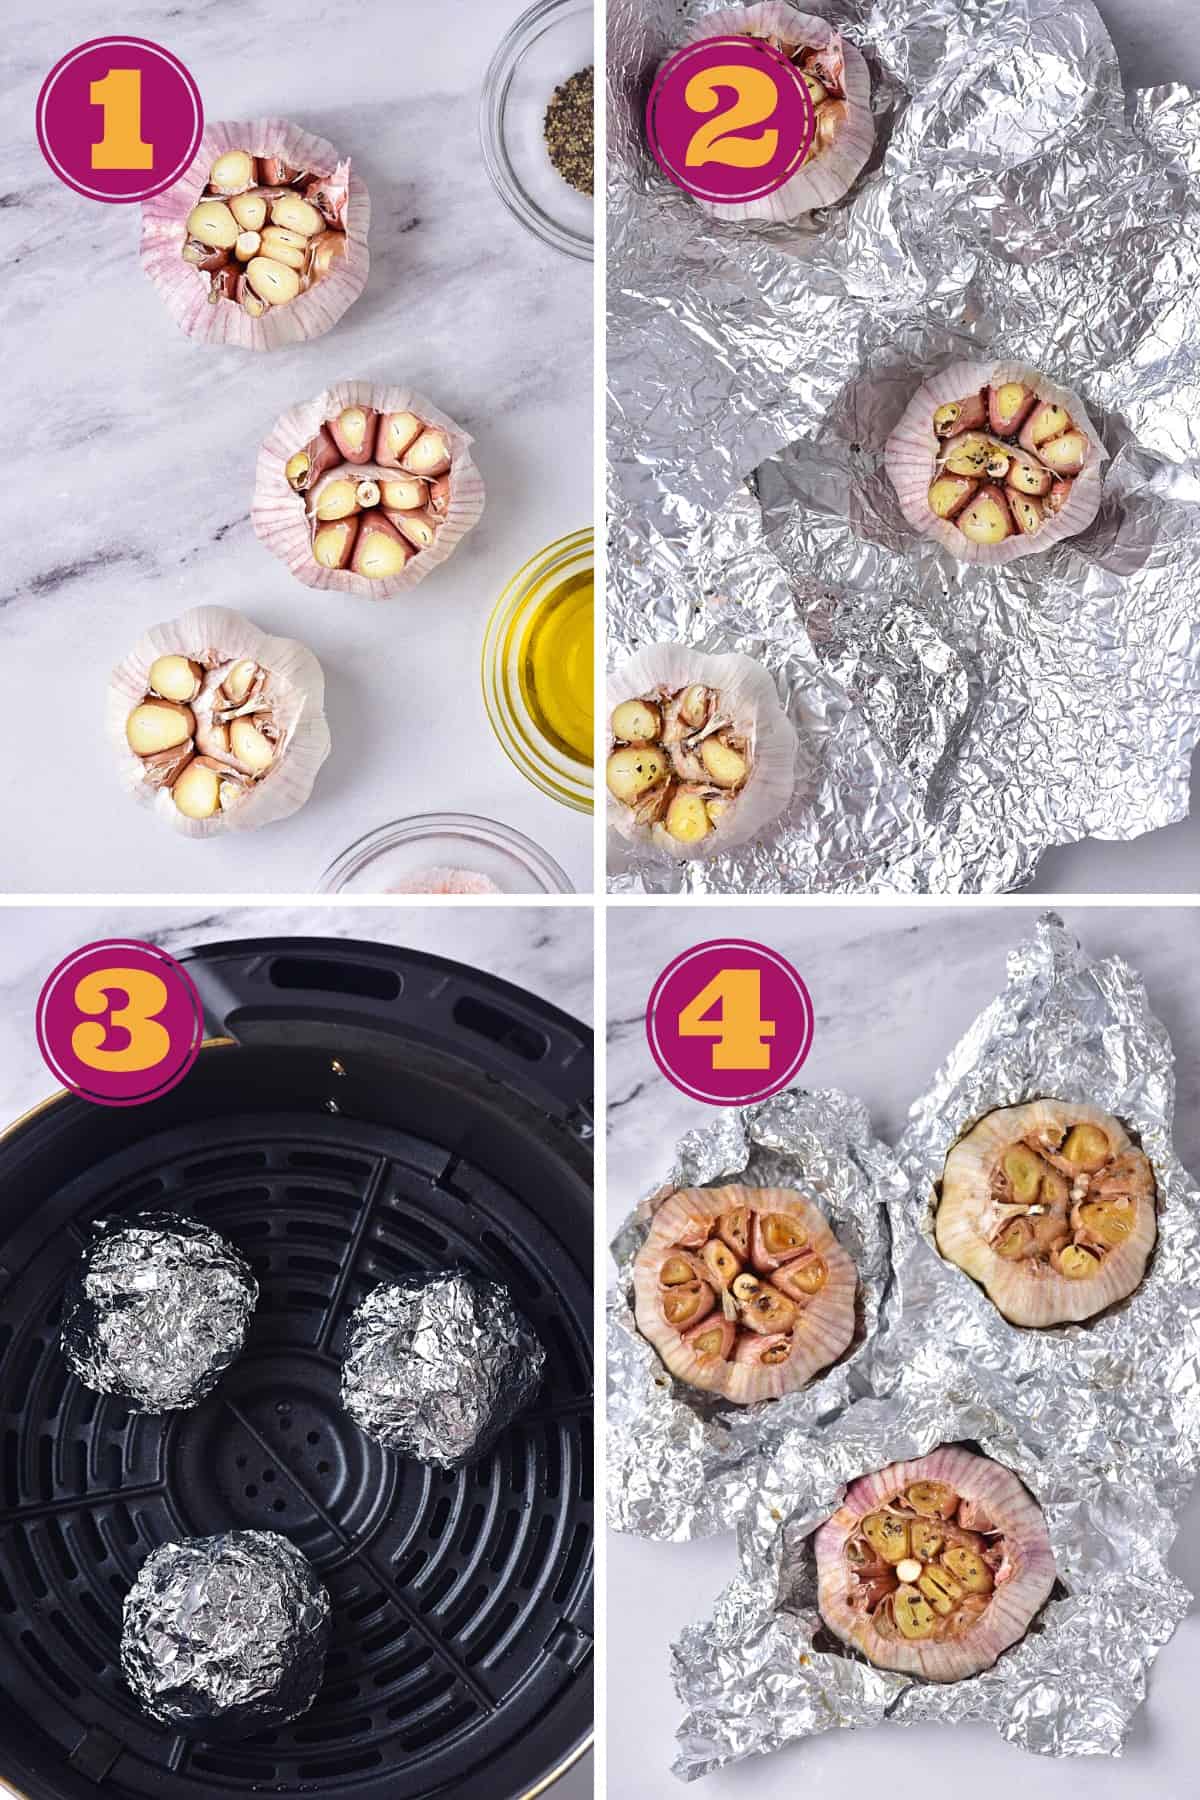 4 images showing how to make air fryer roasted garlic in four steps